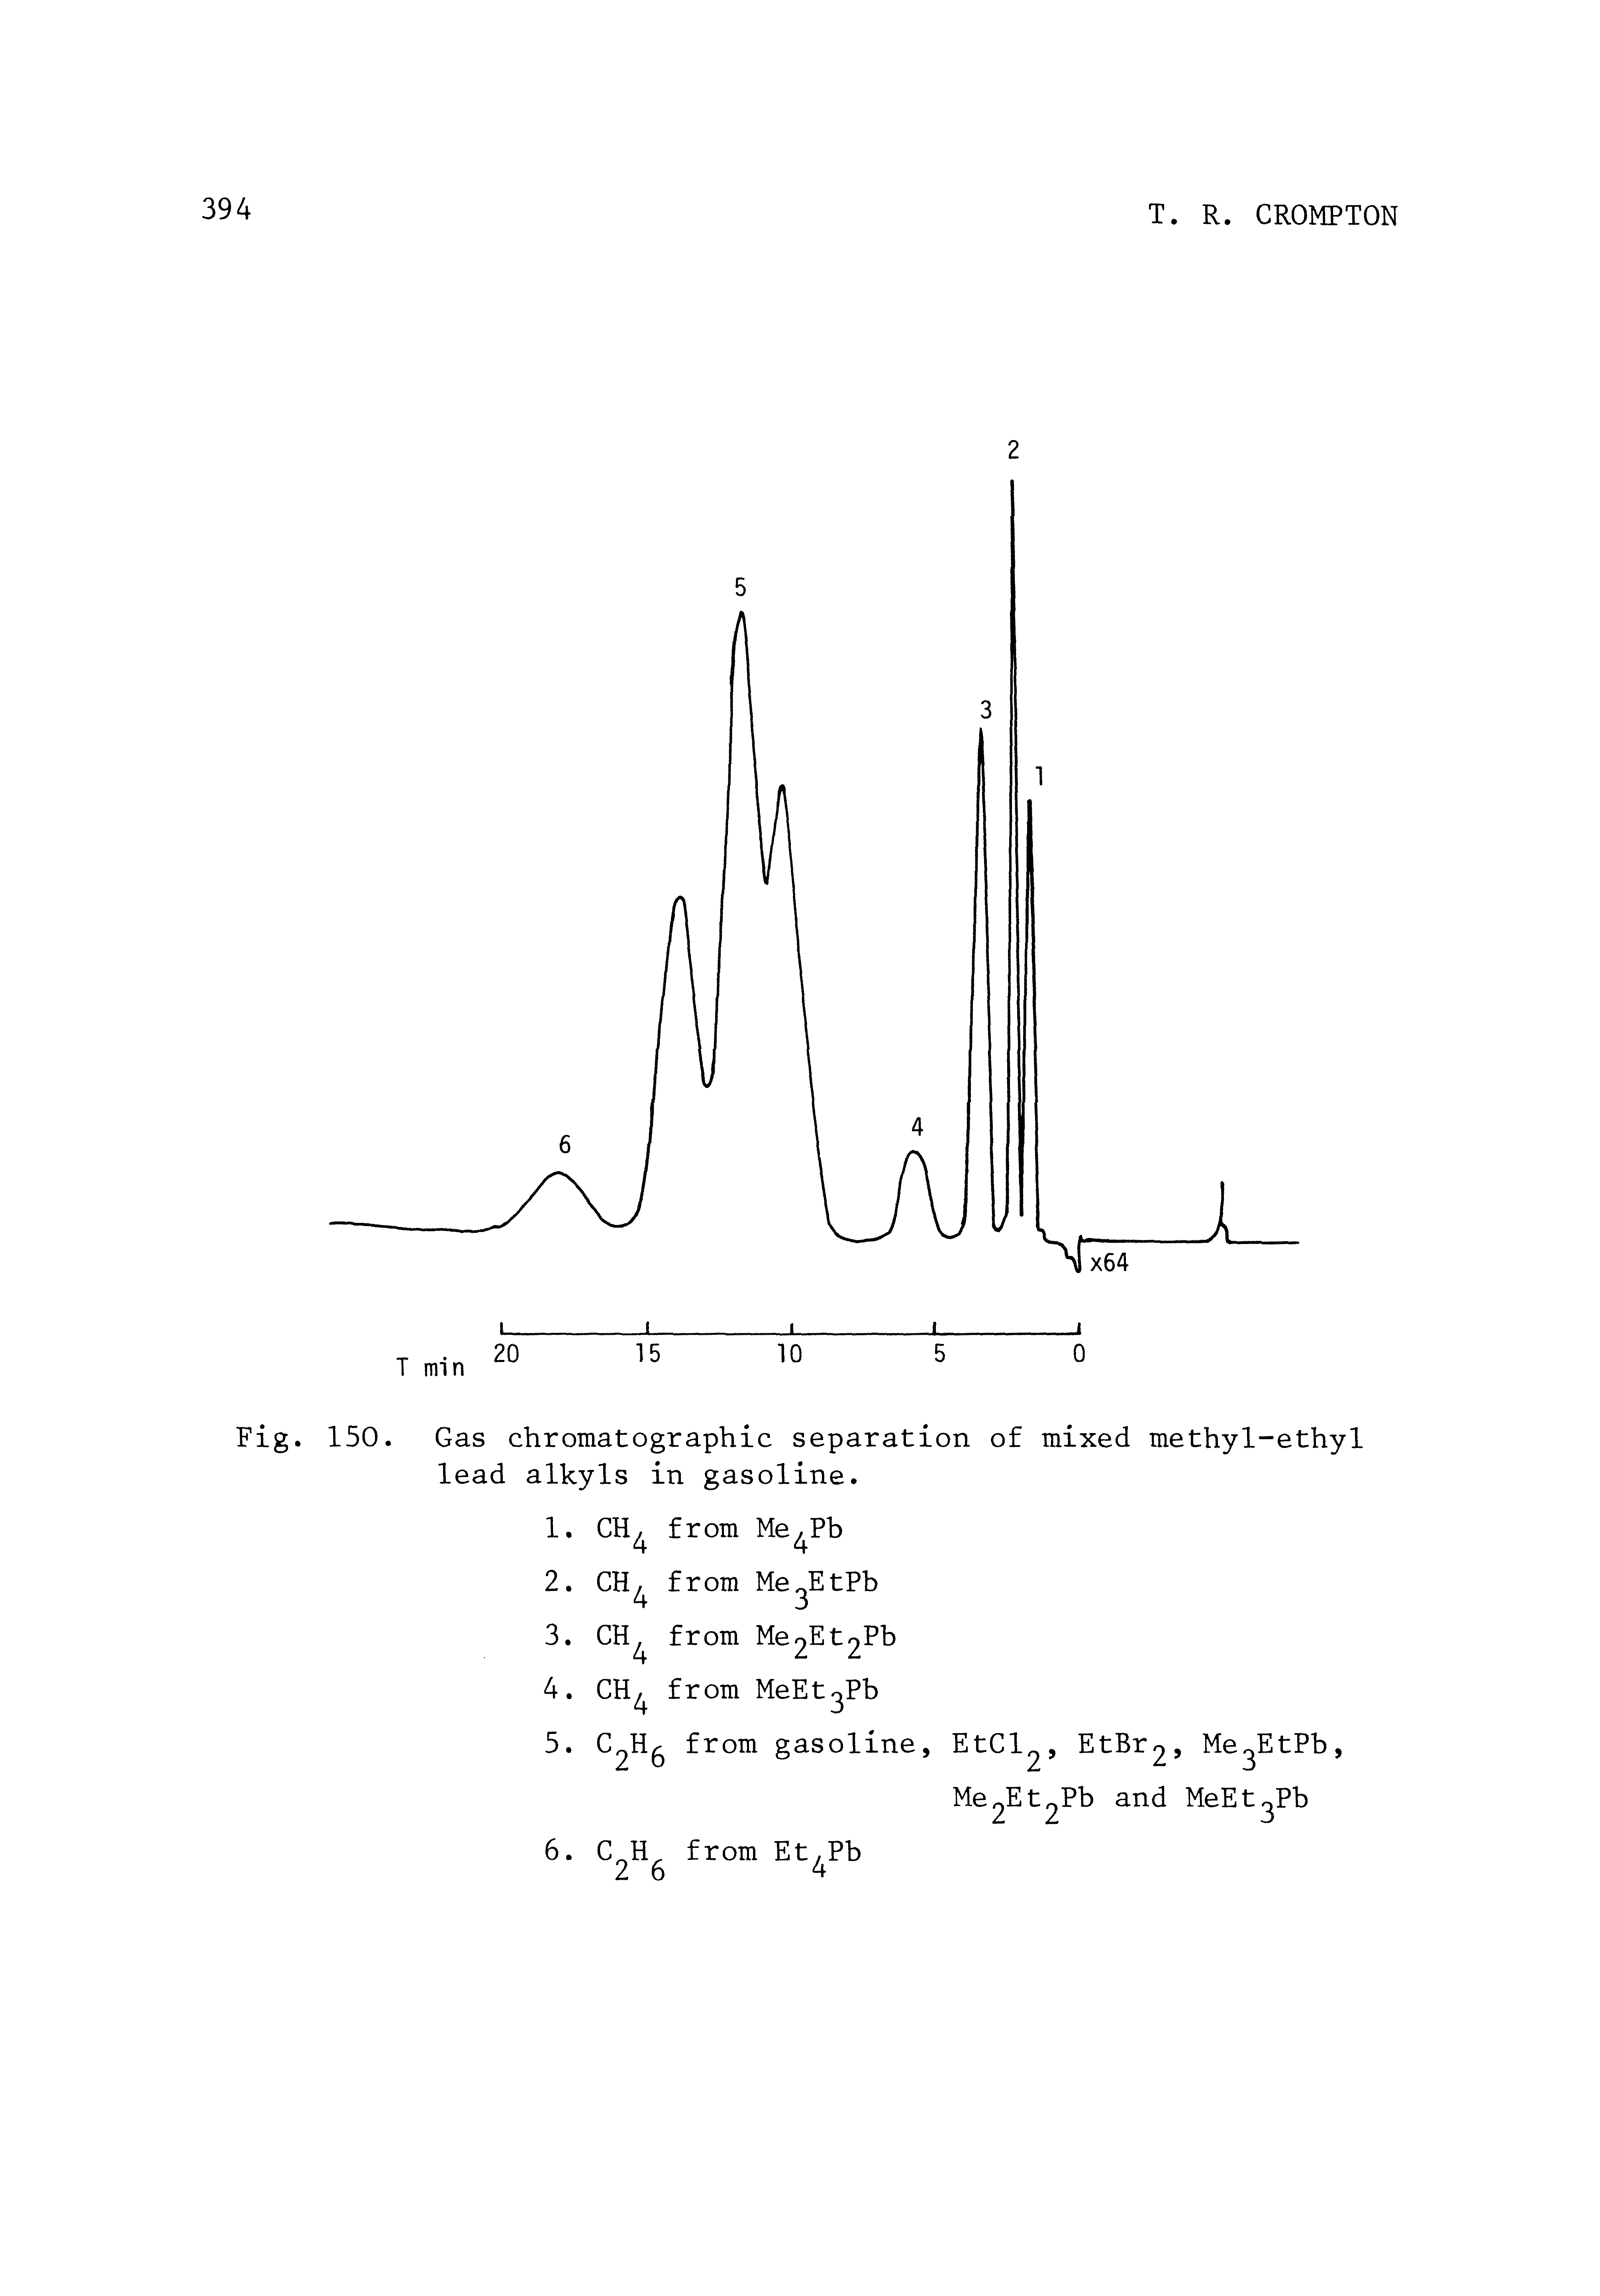 Fig. 150. Gas chromatographic separation of mixed methyl-ethyl lead alkyls in gasoline.